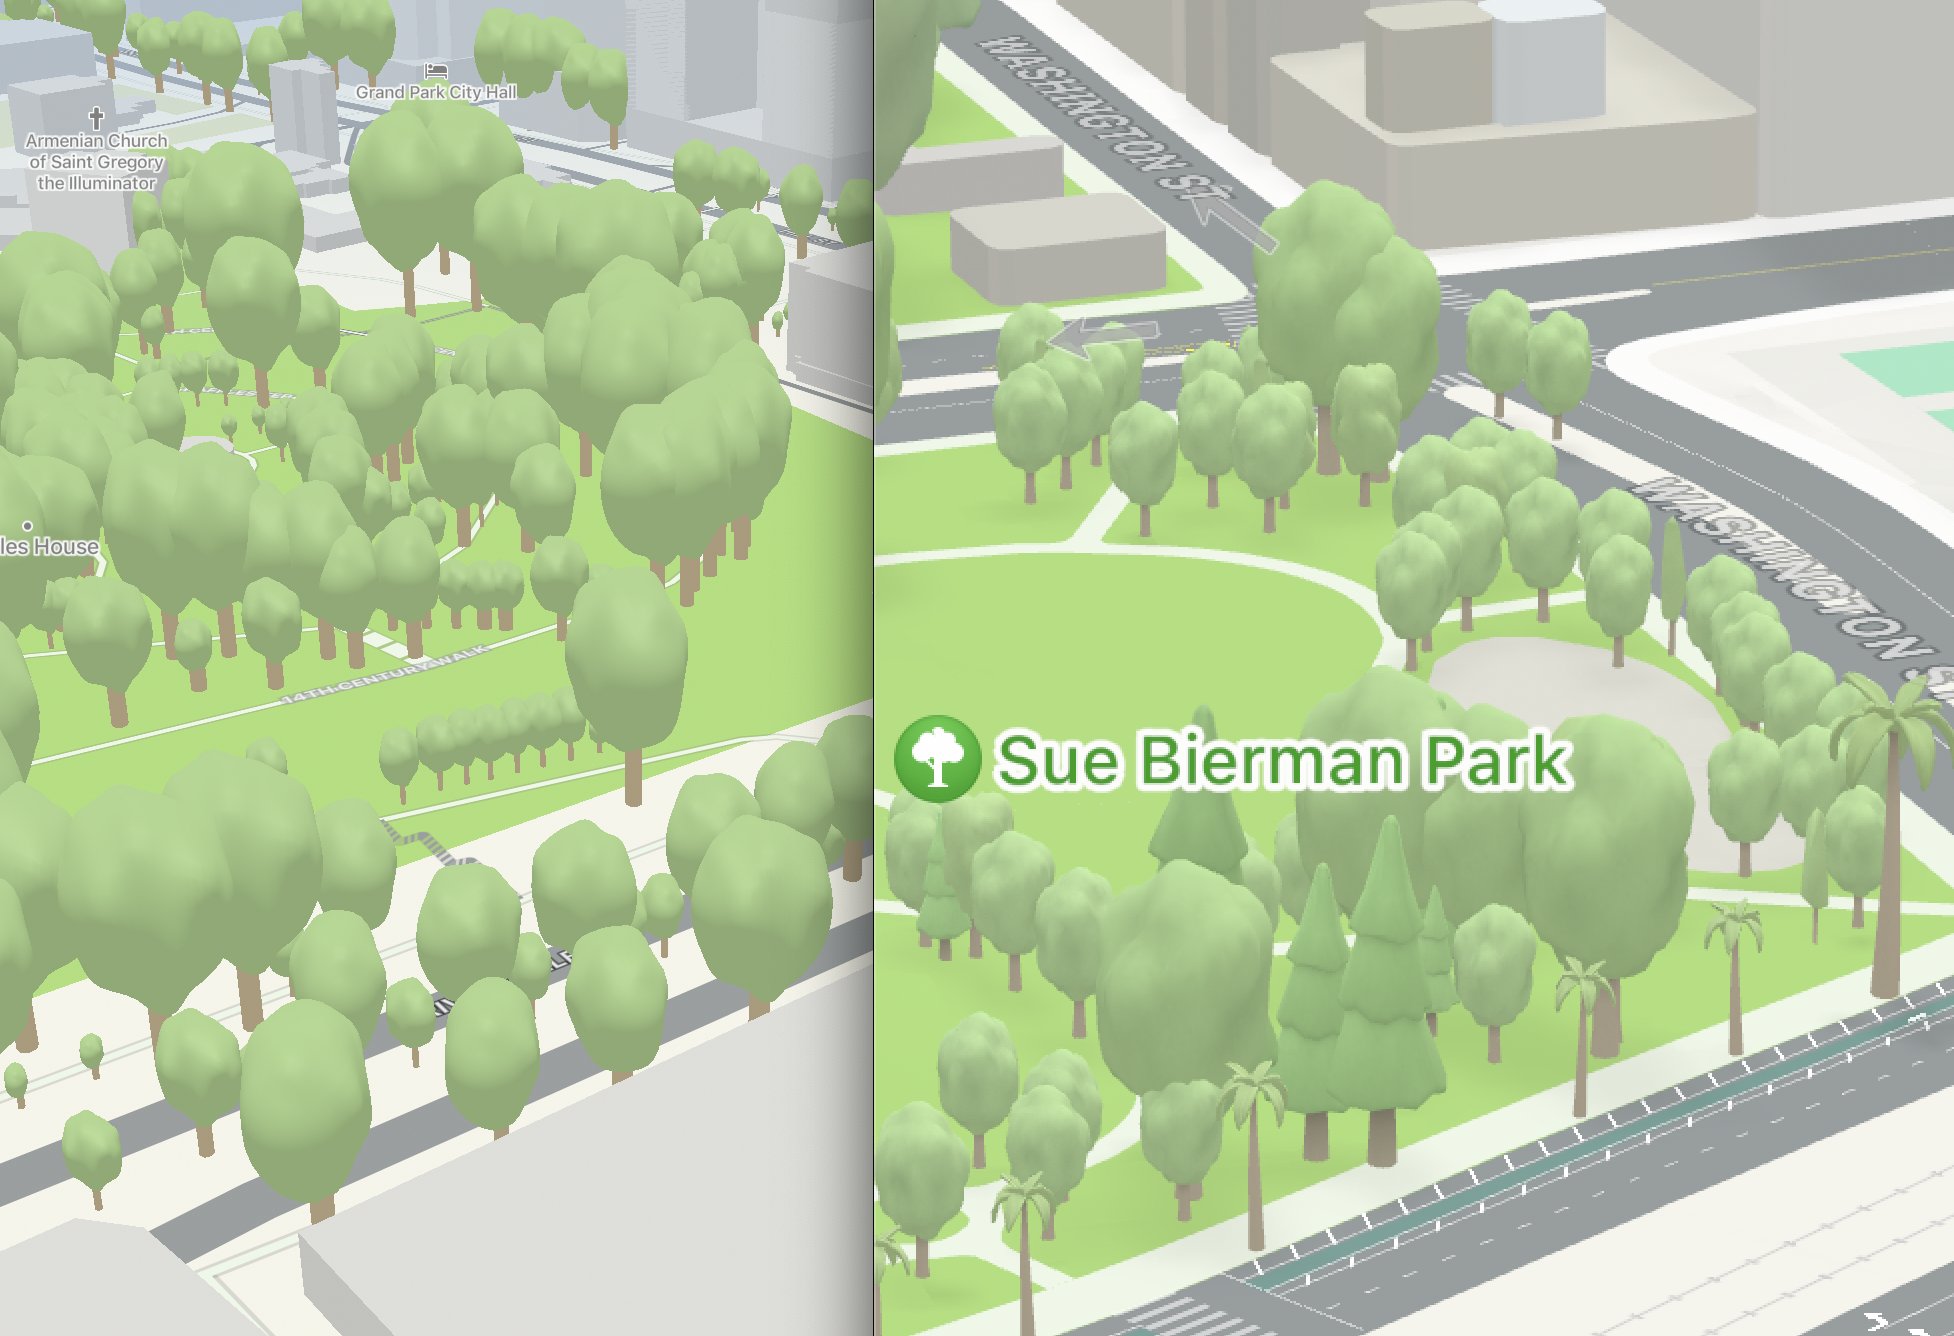 Comparison of trees models between ExploreTrees.SG and Apple Maps